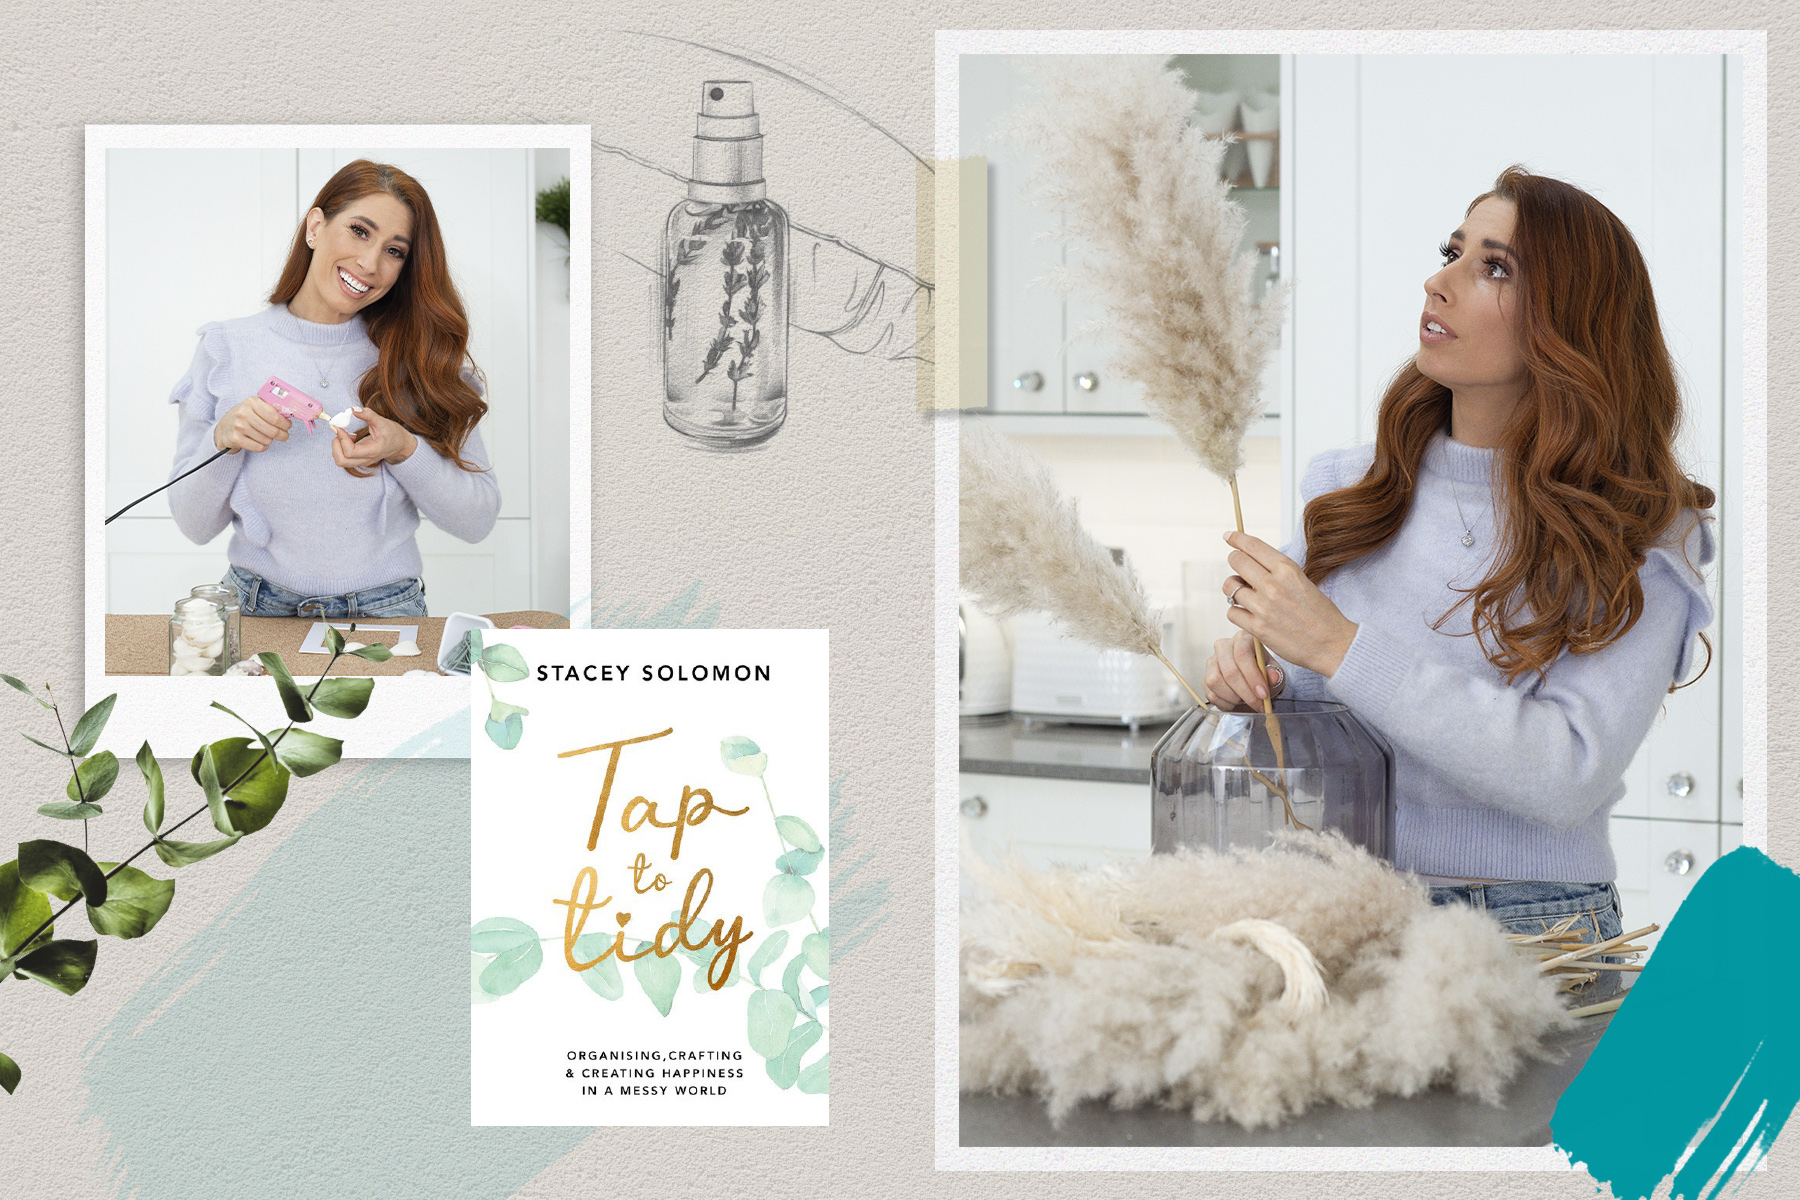 Photographs of Stacey Solomon with the cover of her book